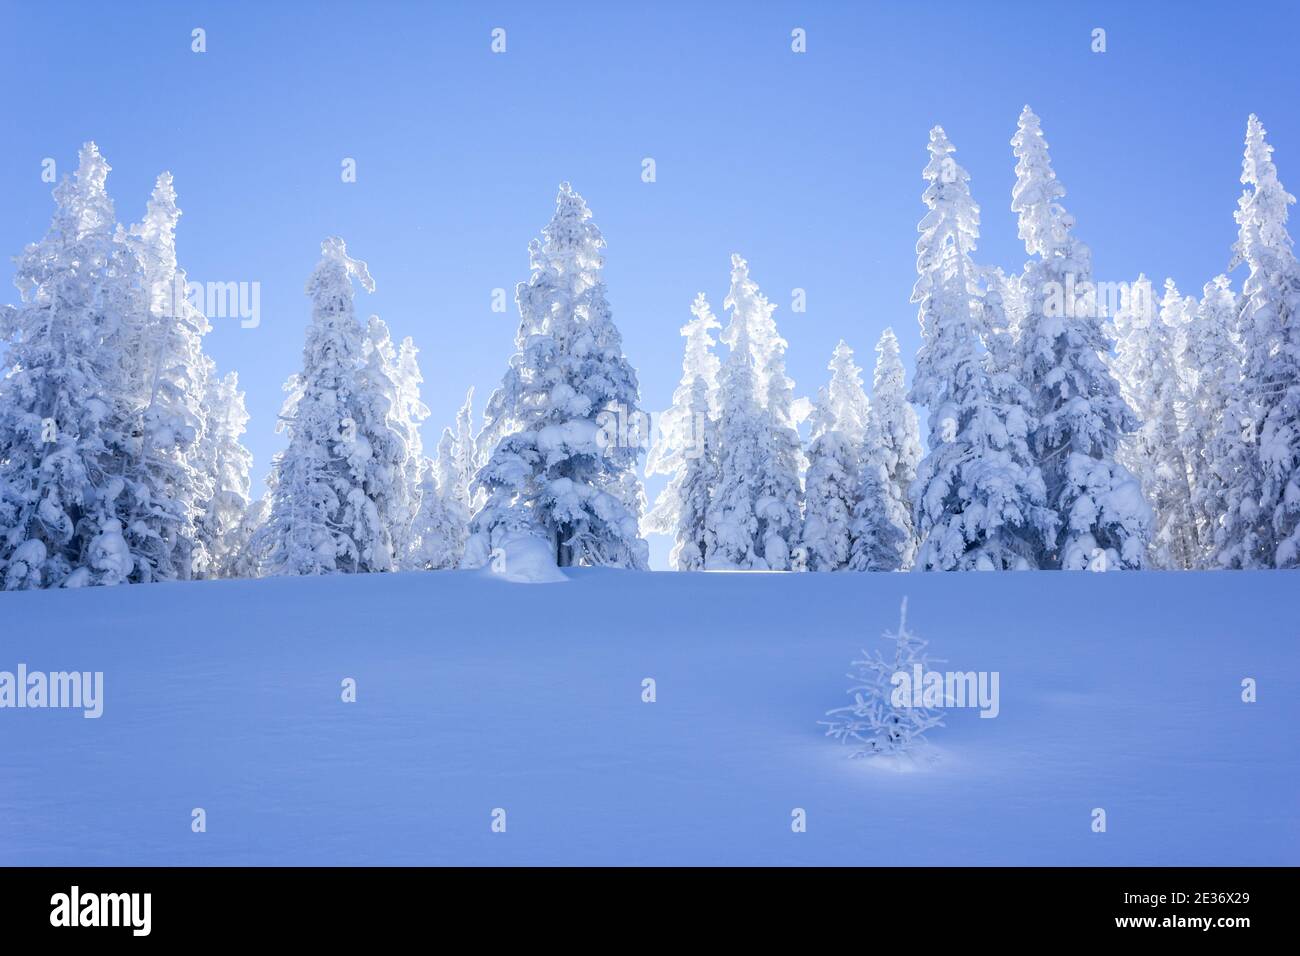 Frozen landscape with snowy spruce trees in the Alps Stock Photo